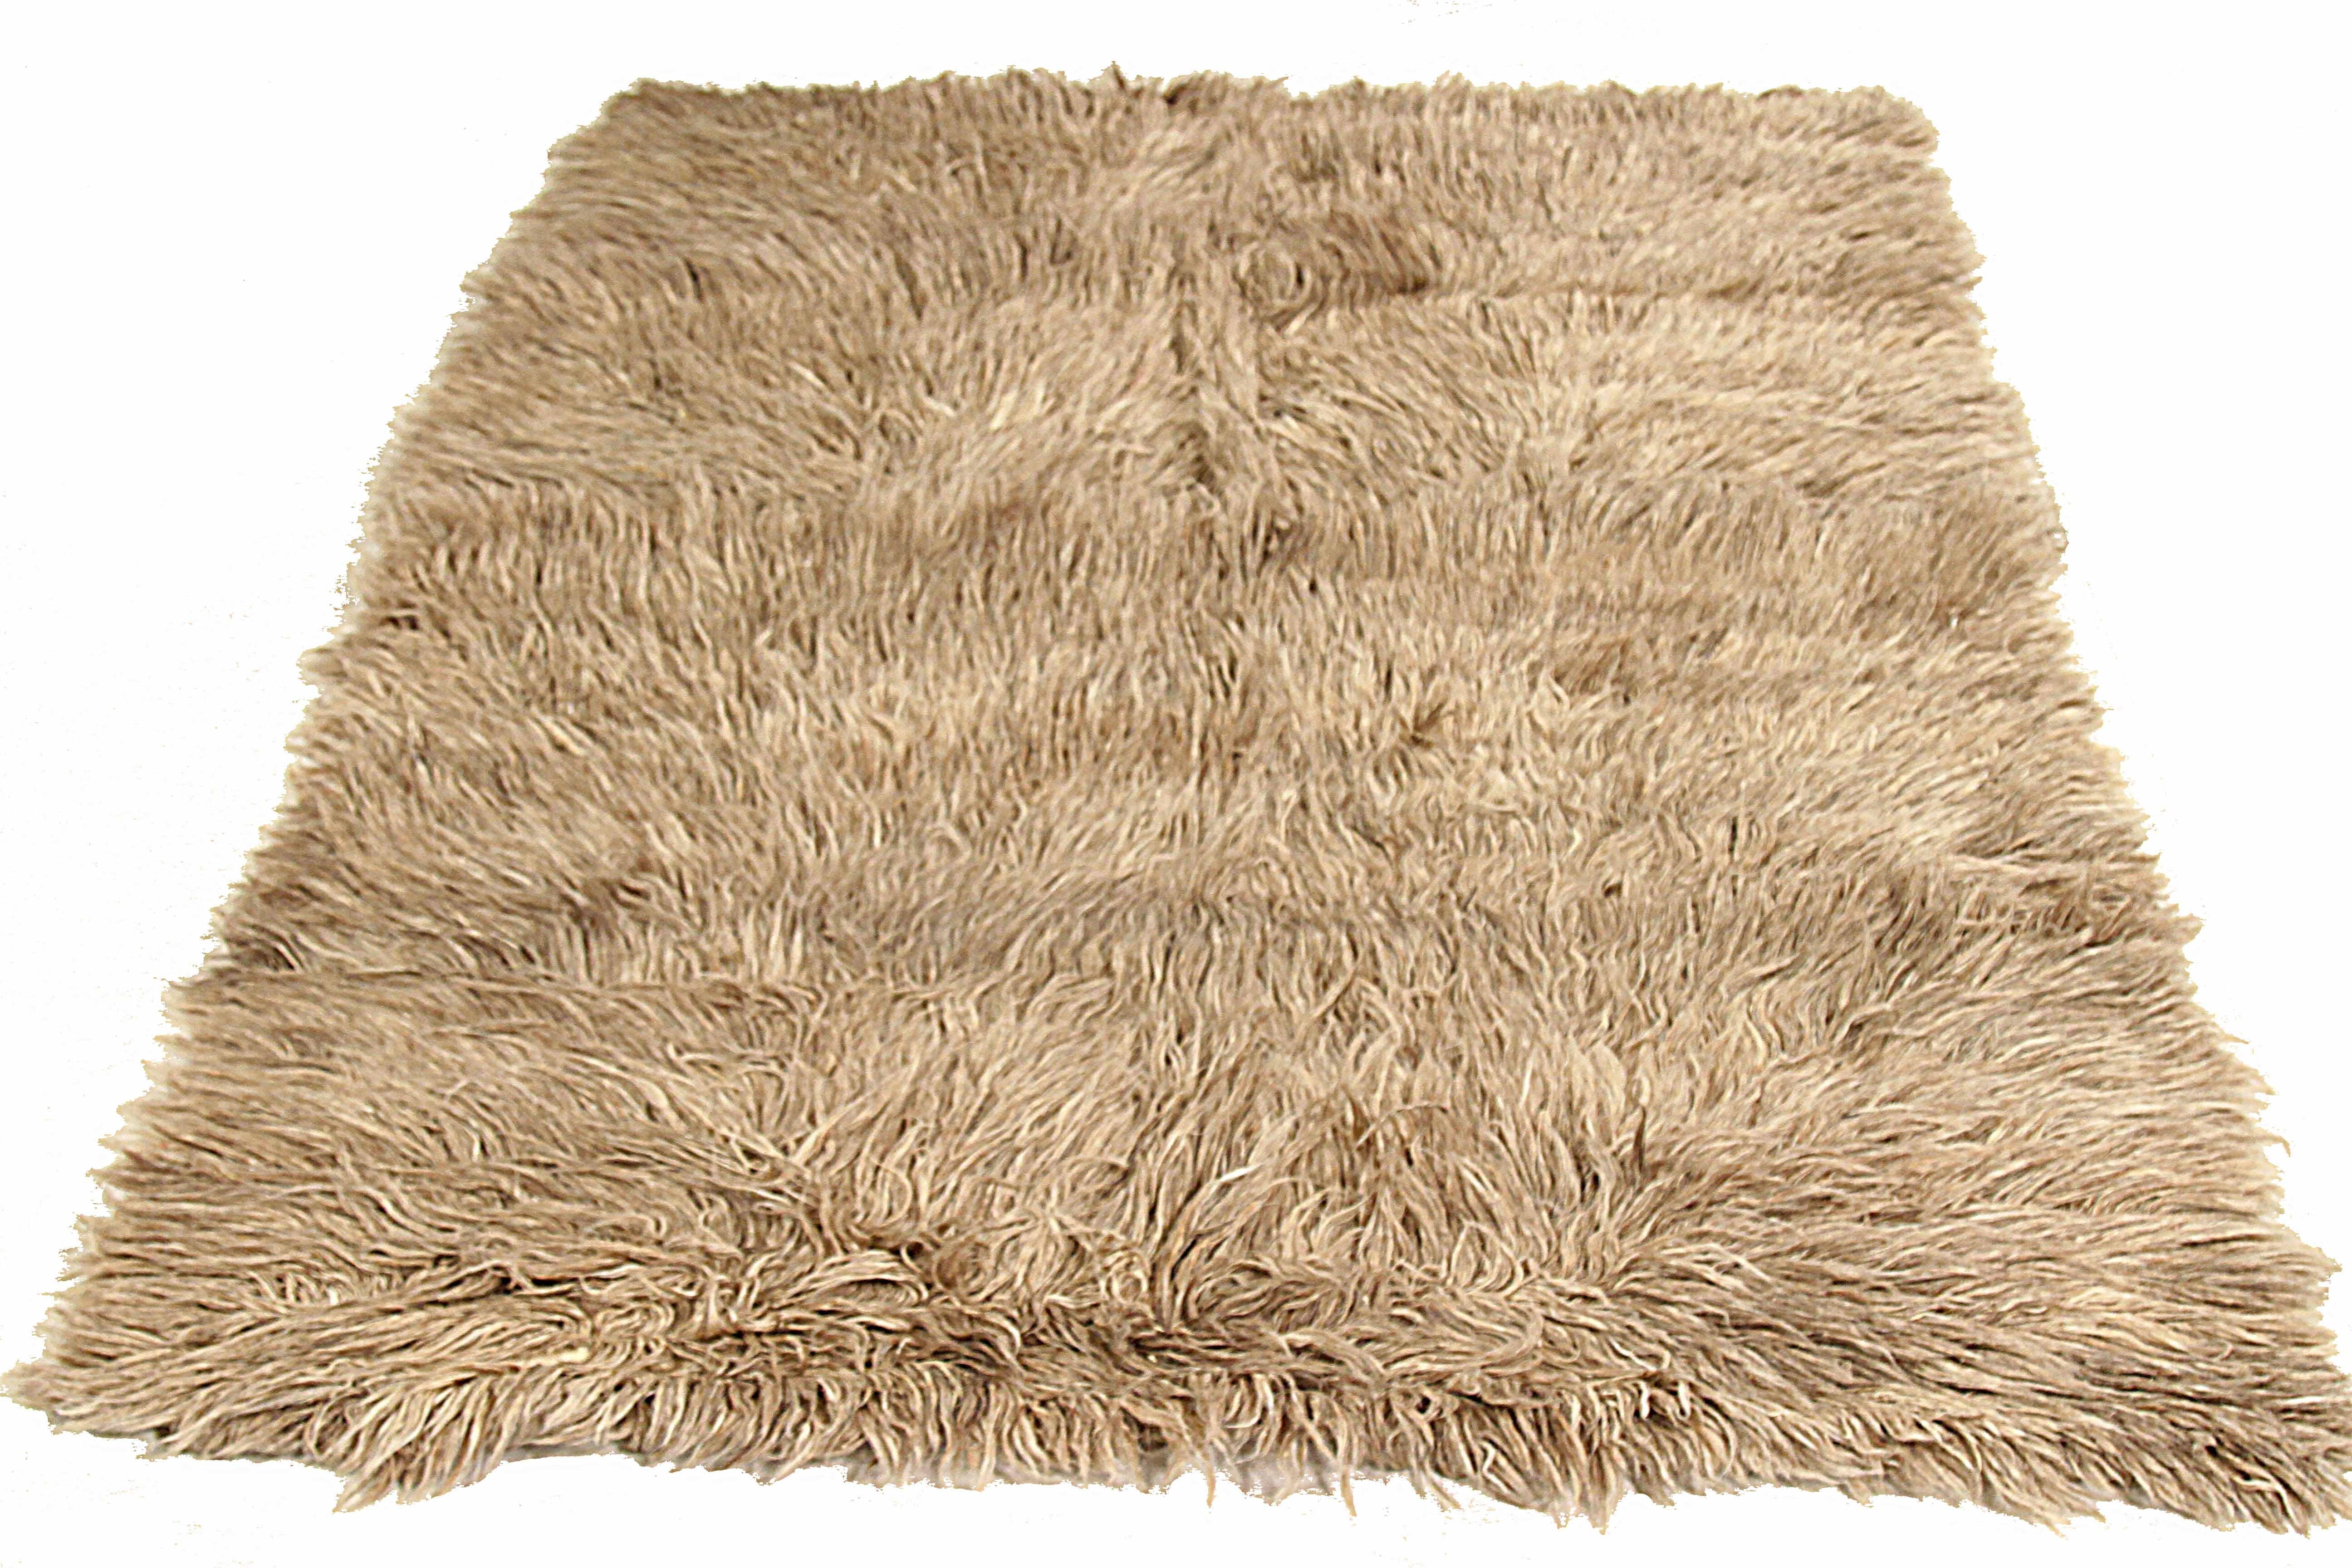 New Turkish area rug handwoven from the finest sheep’s wool. It’s colored with all-natural vegetable dyes that are safe for humans and pets. It’s a traditional Tulu design handwoven by expert artisans. It’s a lovely area rug that can be incorporated